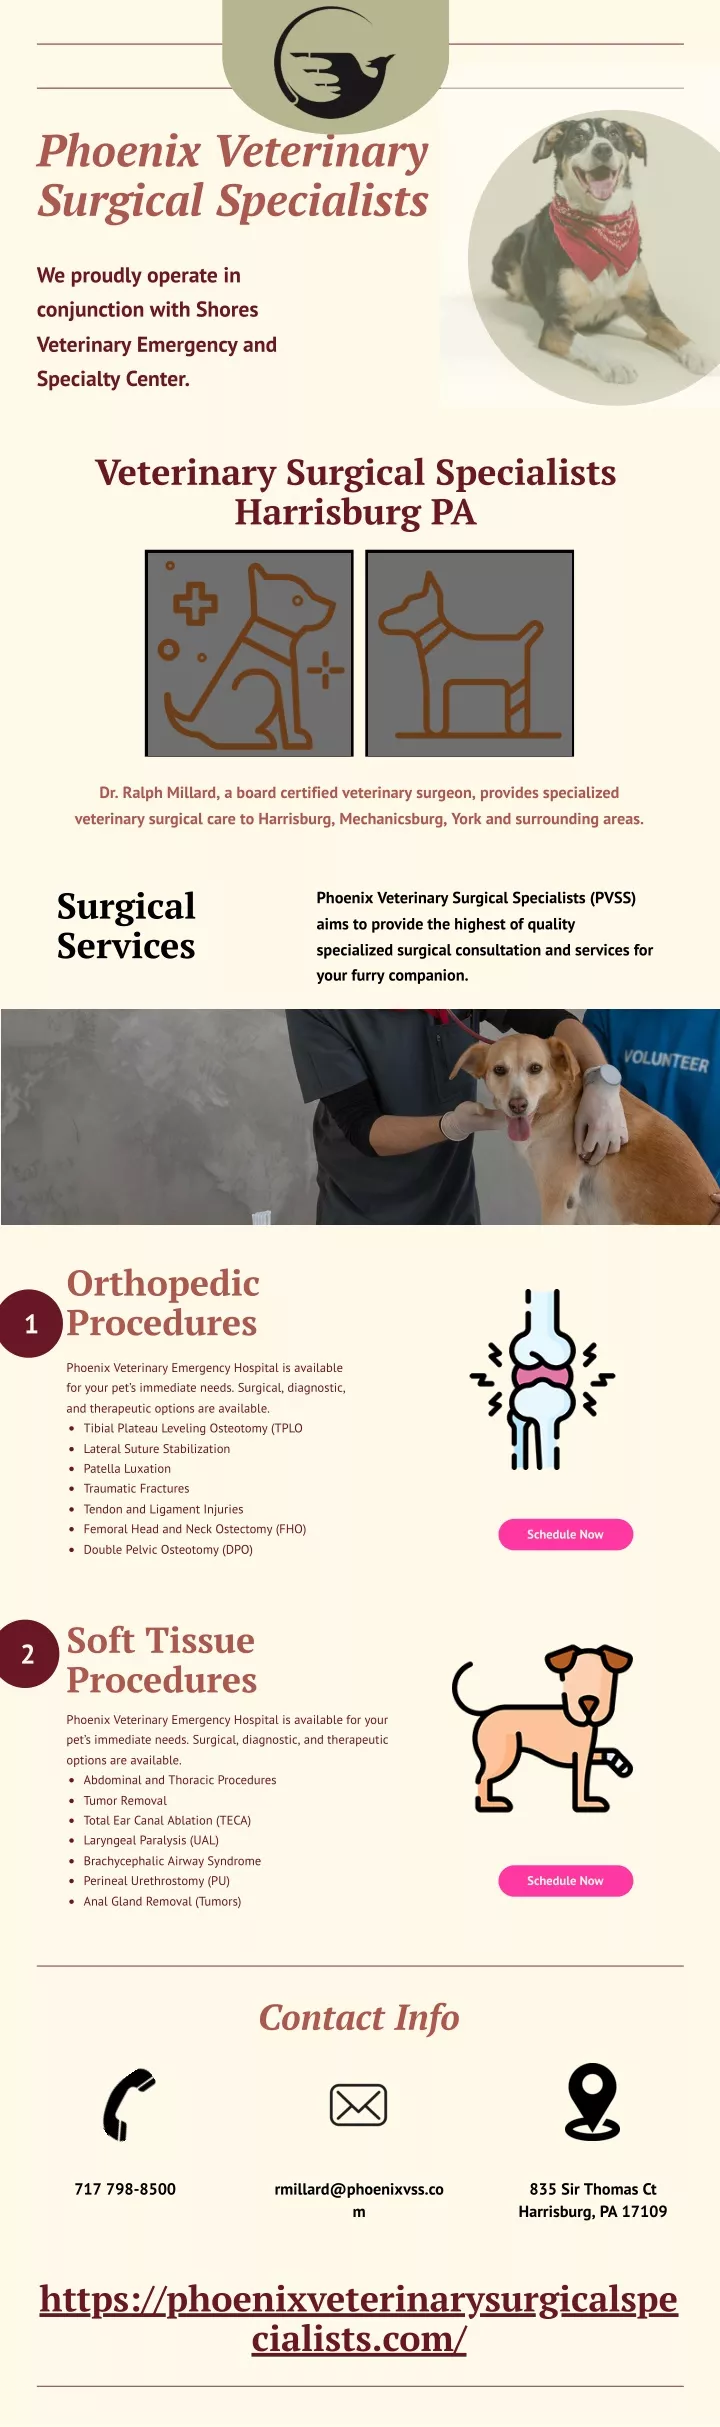 phoenix veterinary surgical specialists